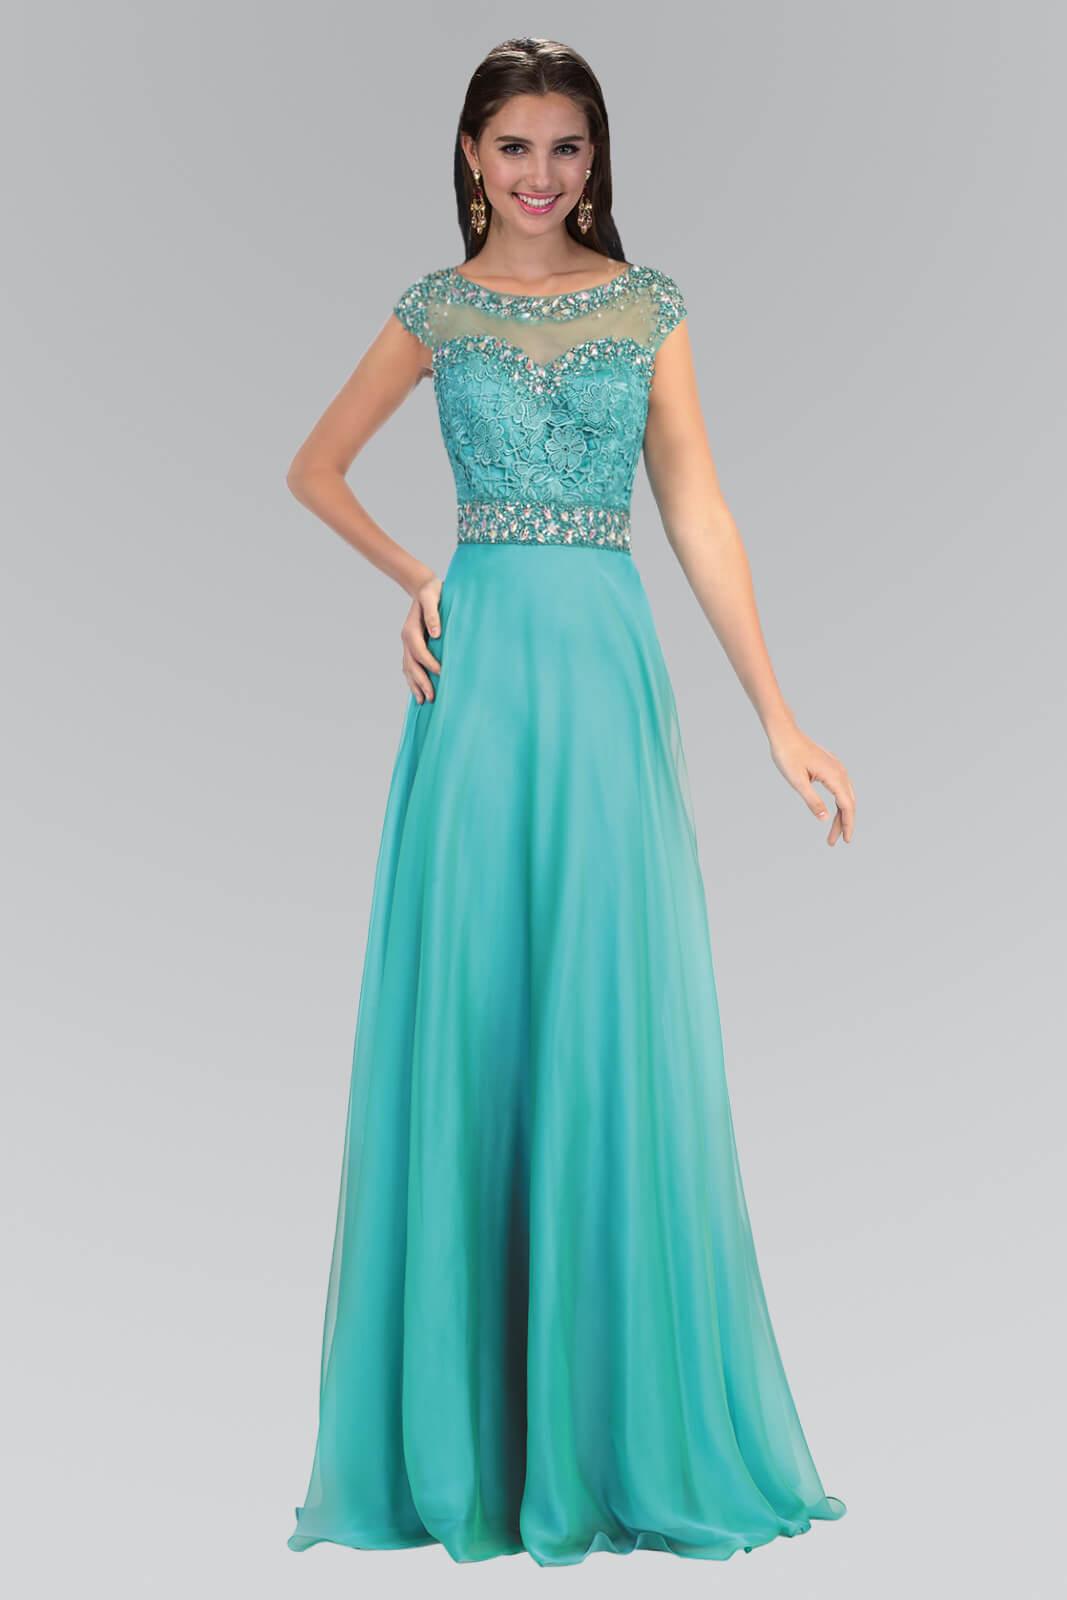 Chiffon Long Prom Dress Formal for $219.99 – The Dress Outlet – The ...